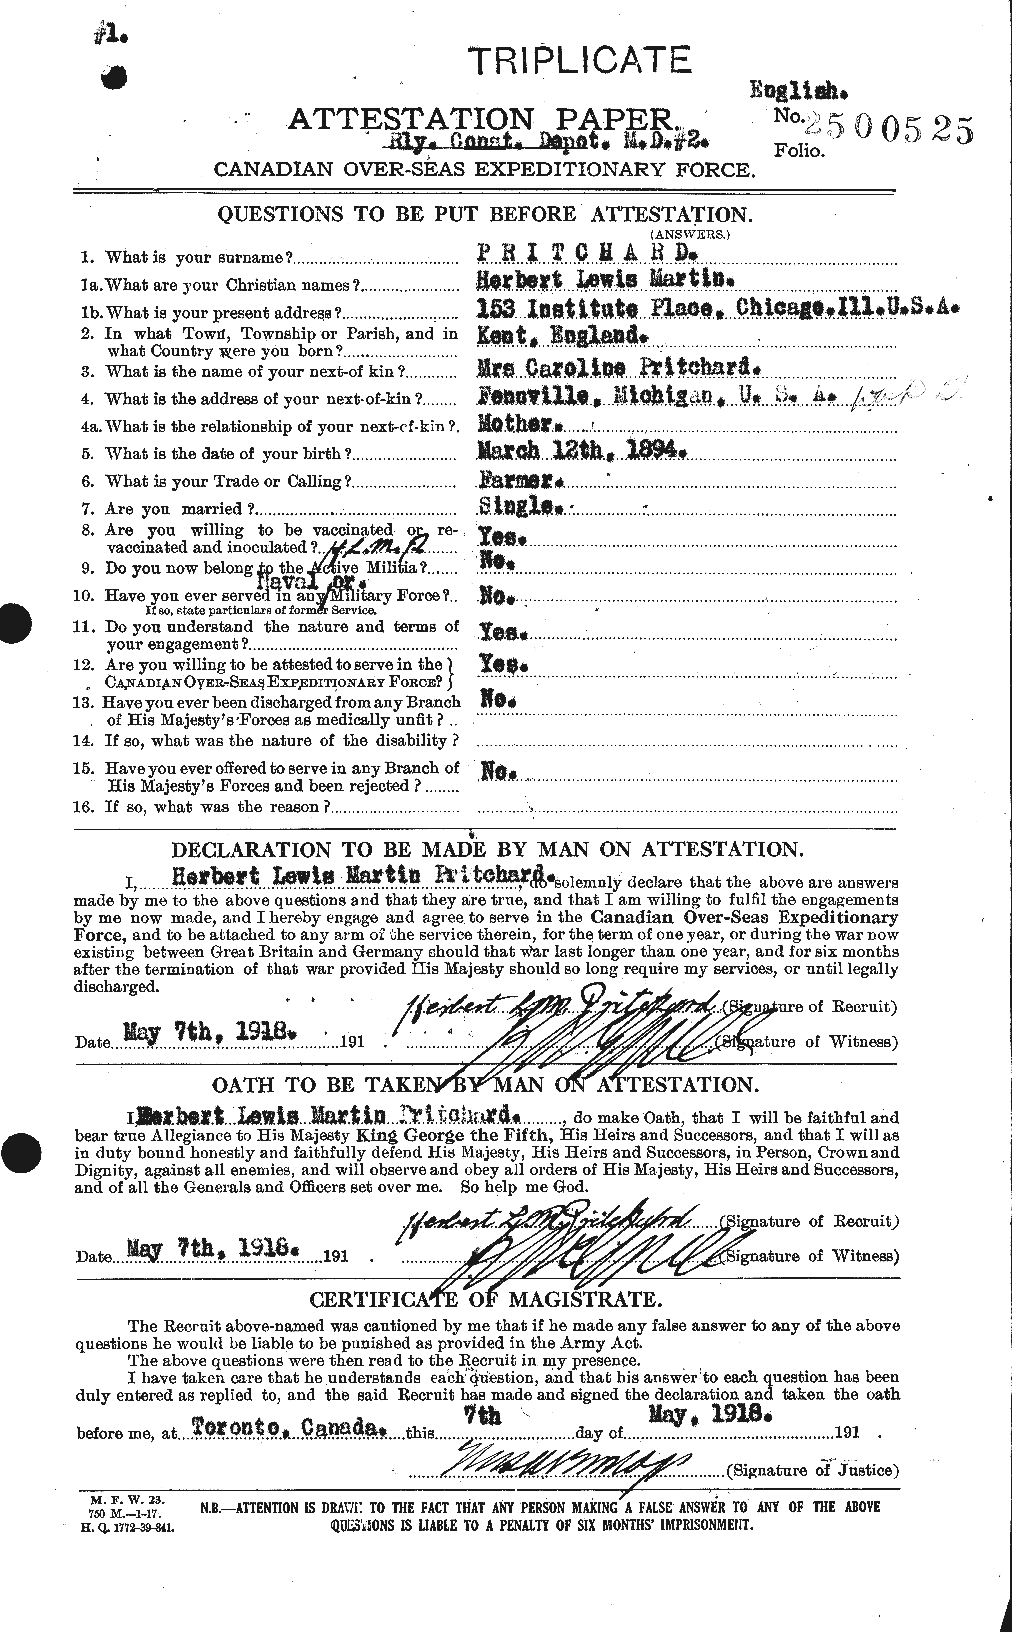 Personnel Records of the First World War - CEF 588549a